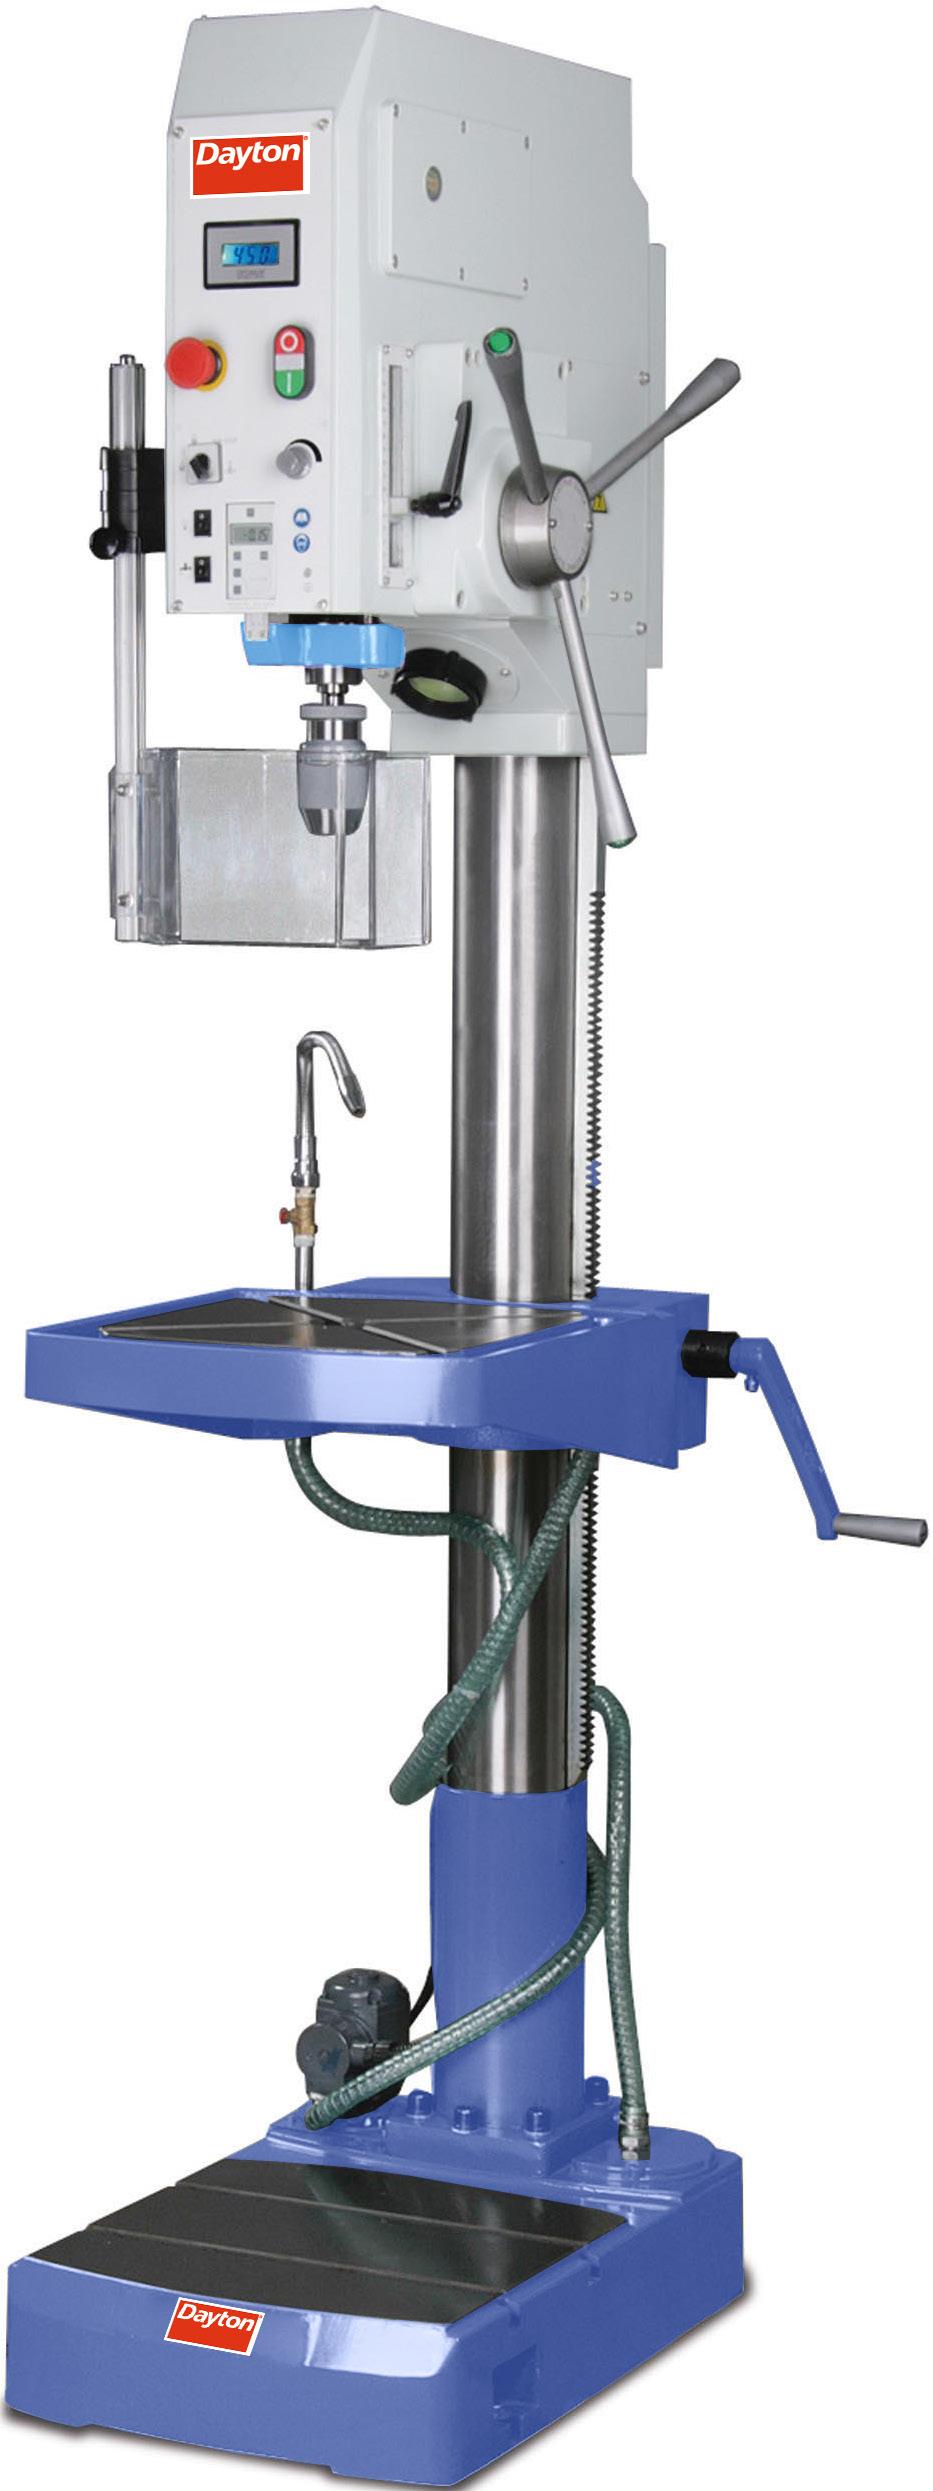 22" GEAR HEAD DRILL PRESS Dayton s 53UH05 is made with a heavy, solid cast iron construction. It ensures smooth running and stability due to an enlarged thick-walled column.